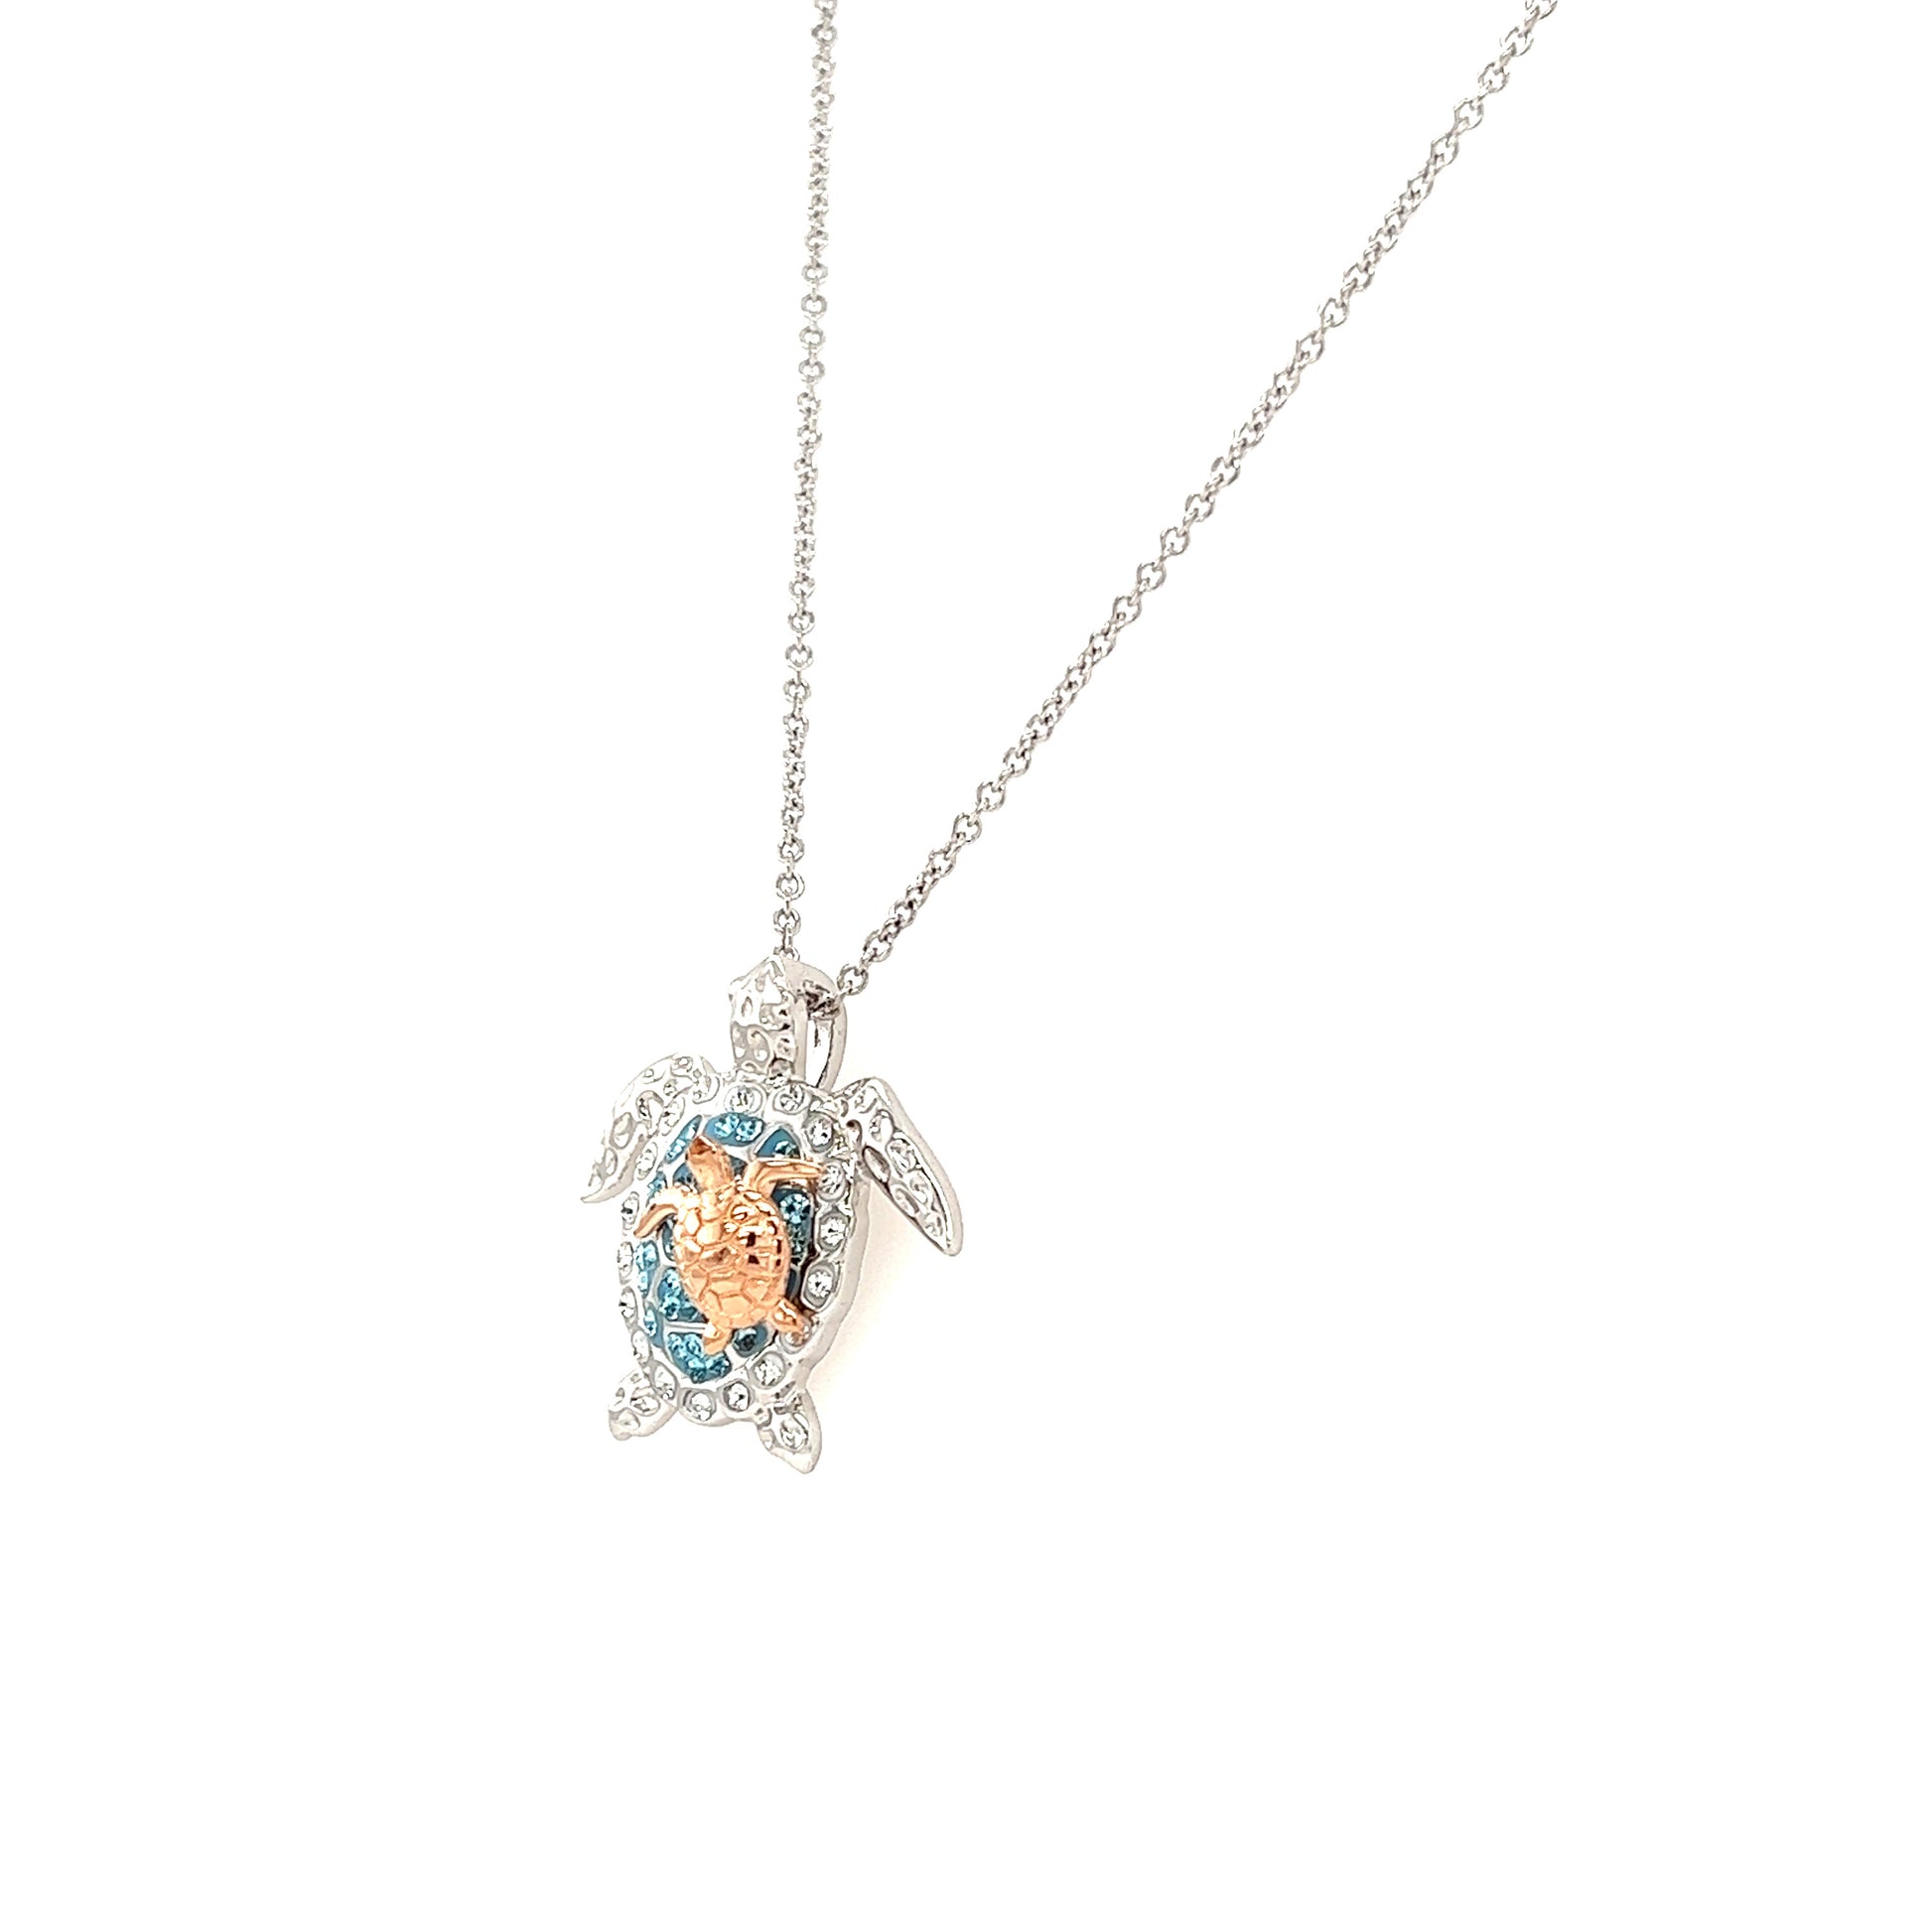 Sea Turtle Necklace with Rose Gold Accent in Sterling Silver Right Side View